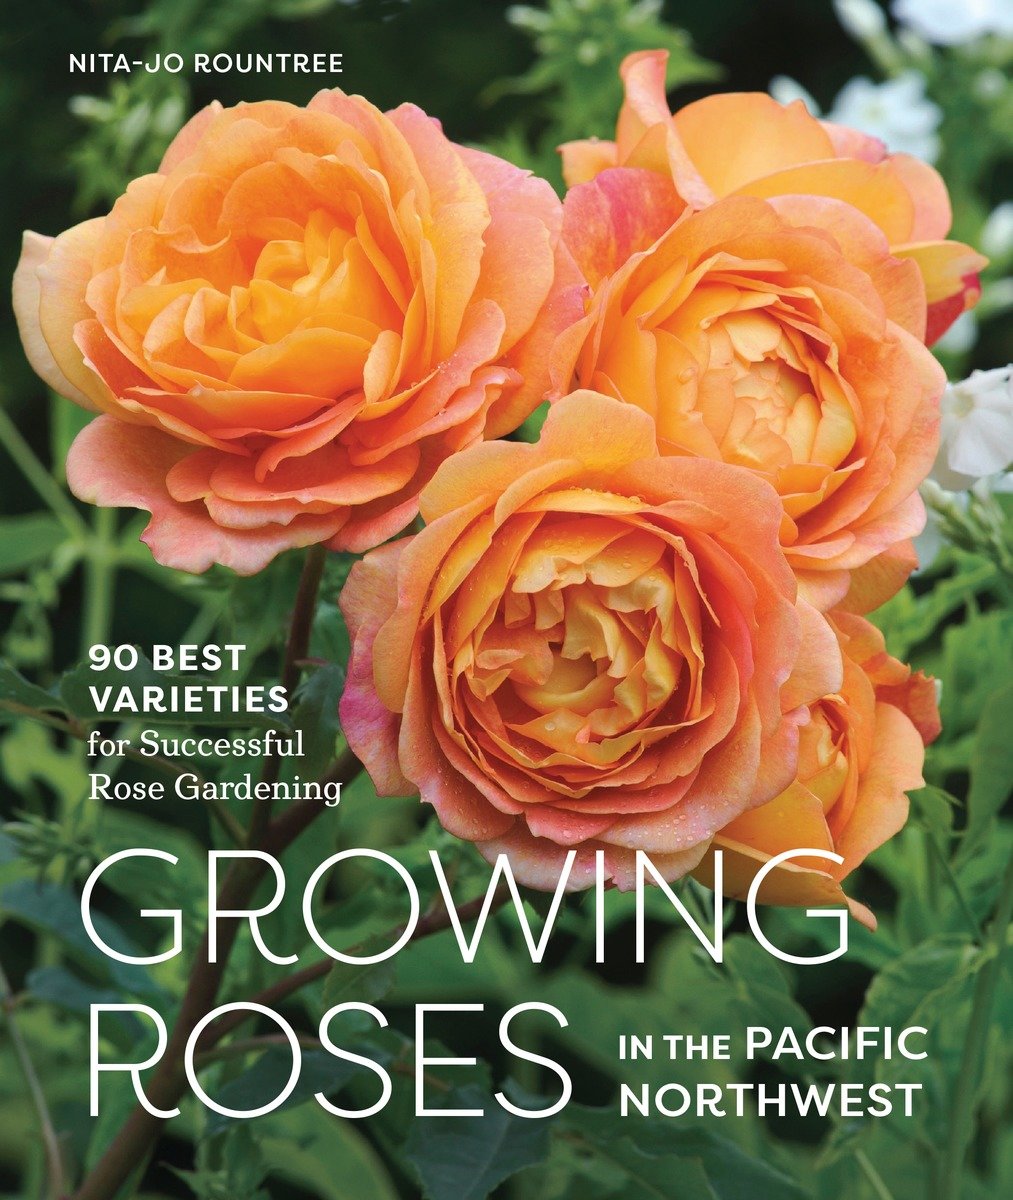 Growing Roses In The Pacific Northwest (Hardcover Book)